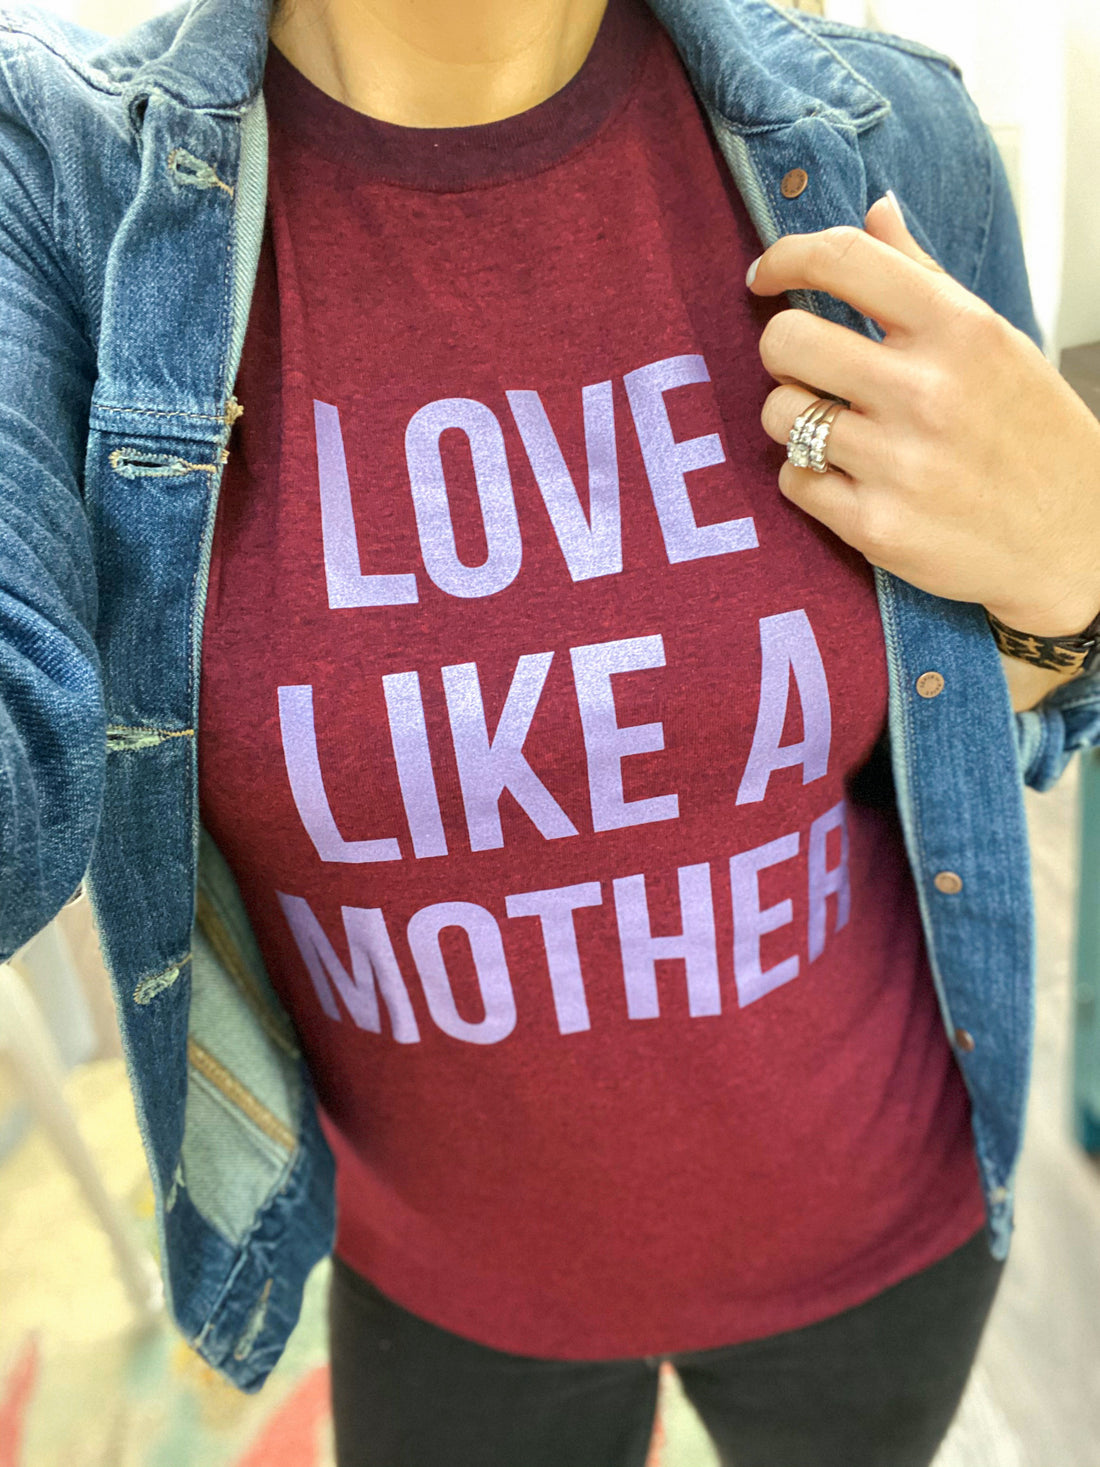 Love Like a Mother Burgundy Acid Wash Tee [ships in 3-5 business days]